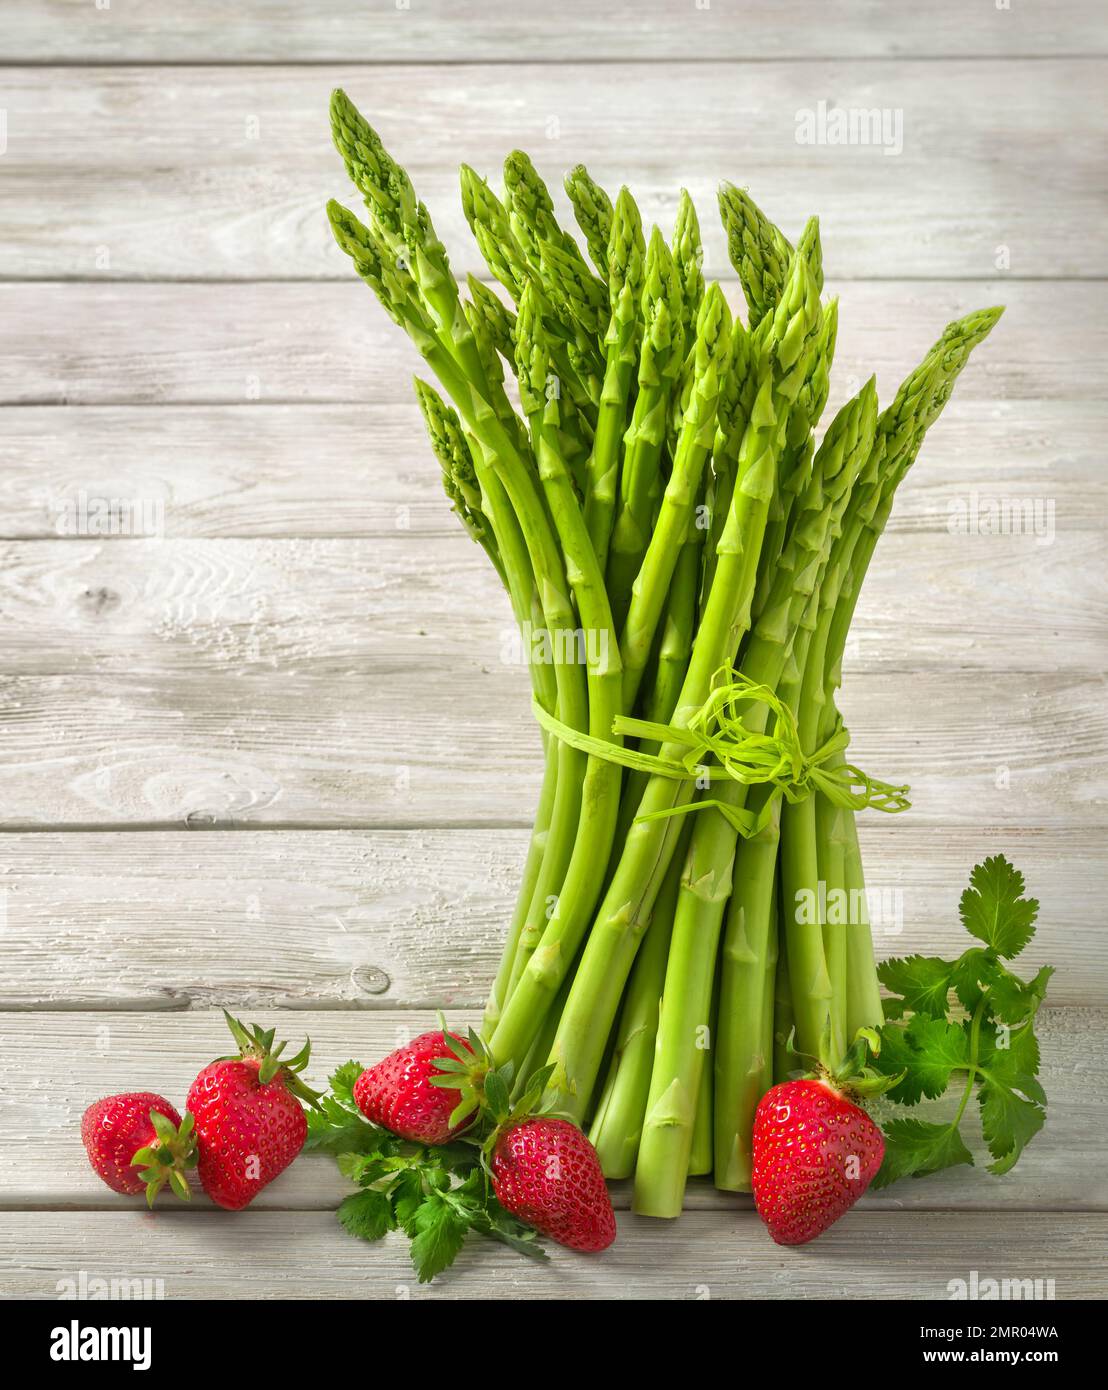 Bunch of green raw asparagus decorated with fresh strawberries on bright pale wood background, vertical format Stock Photo